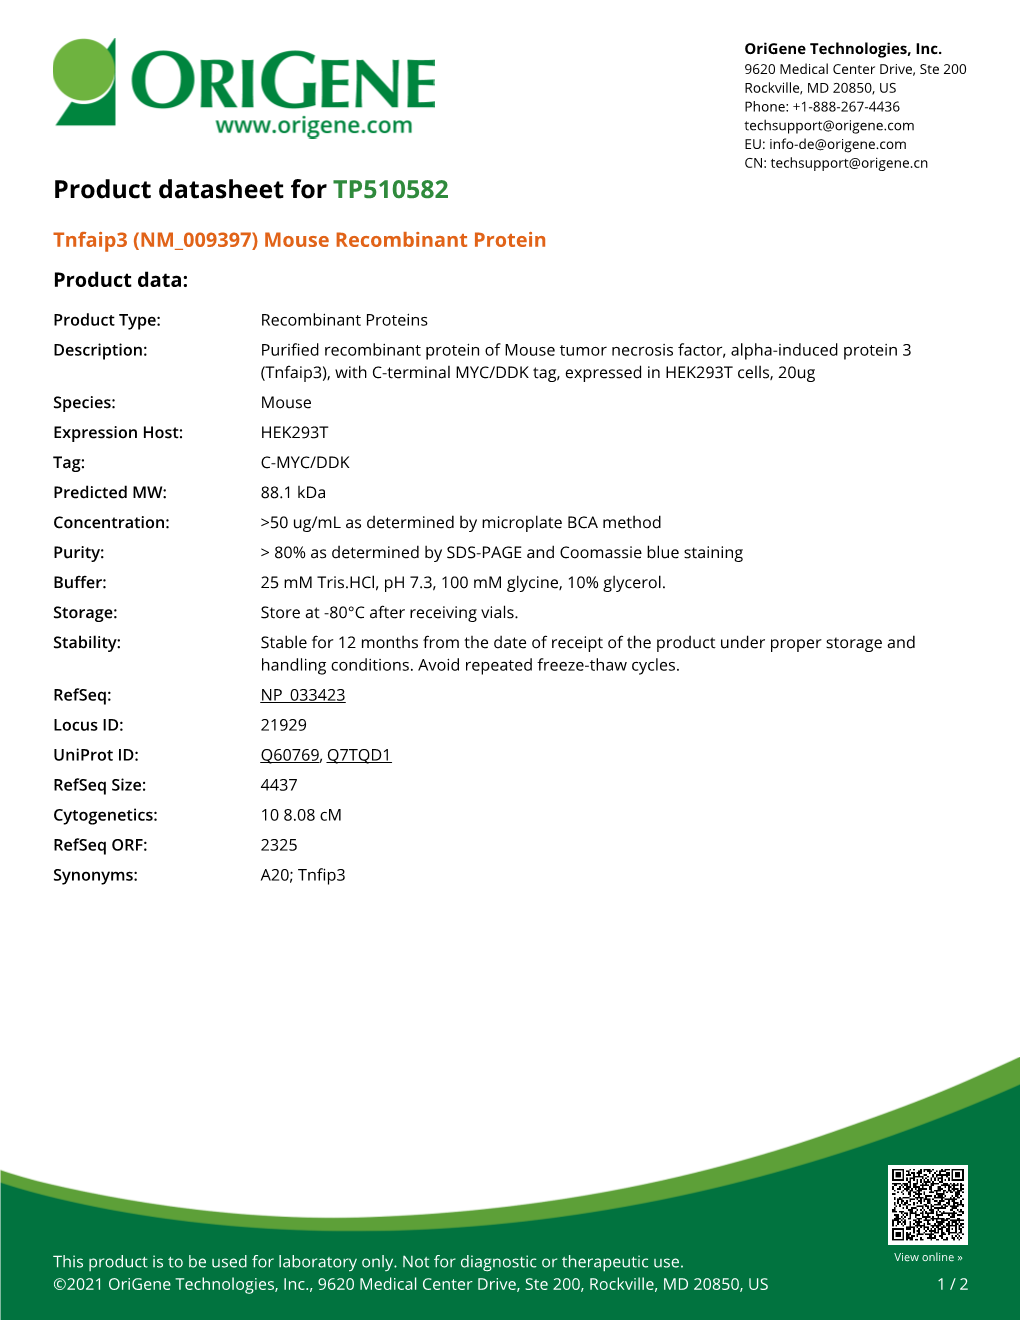 Tnfaip3 (NM 009397) Mouse Recombinant Protein – TP510582